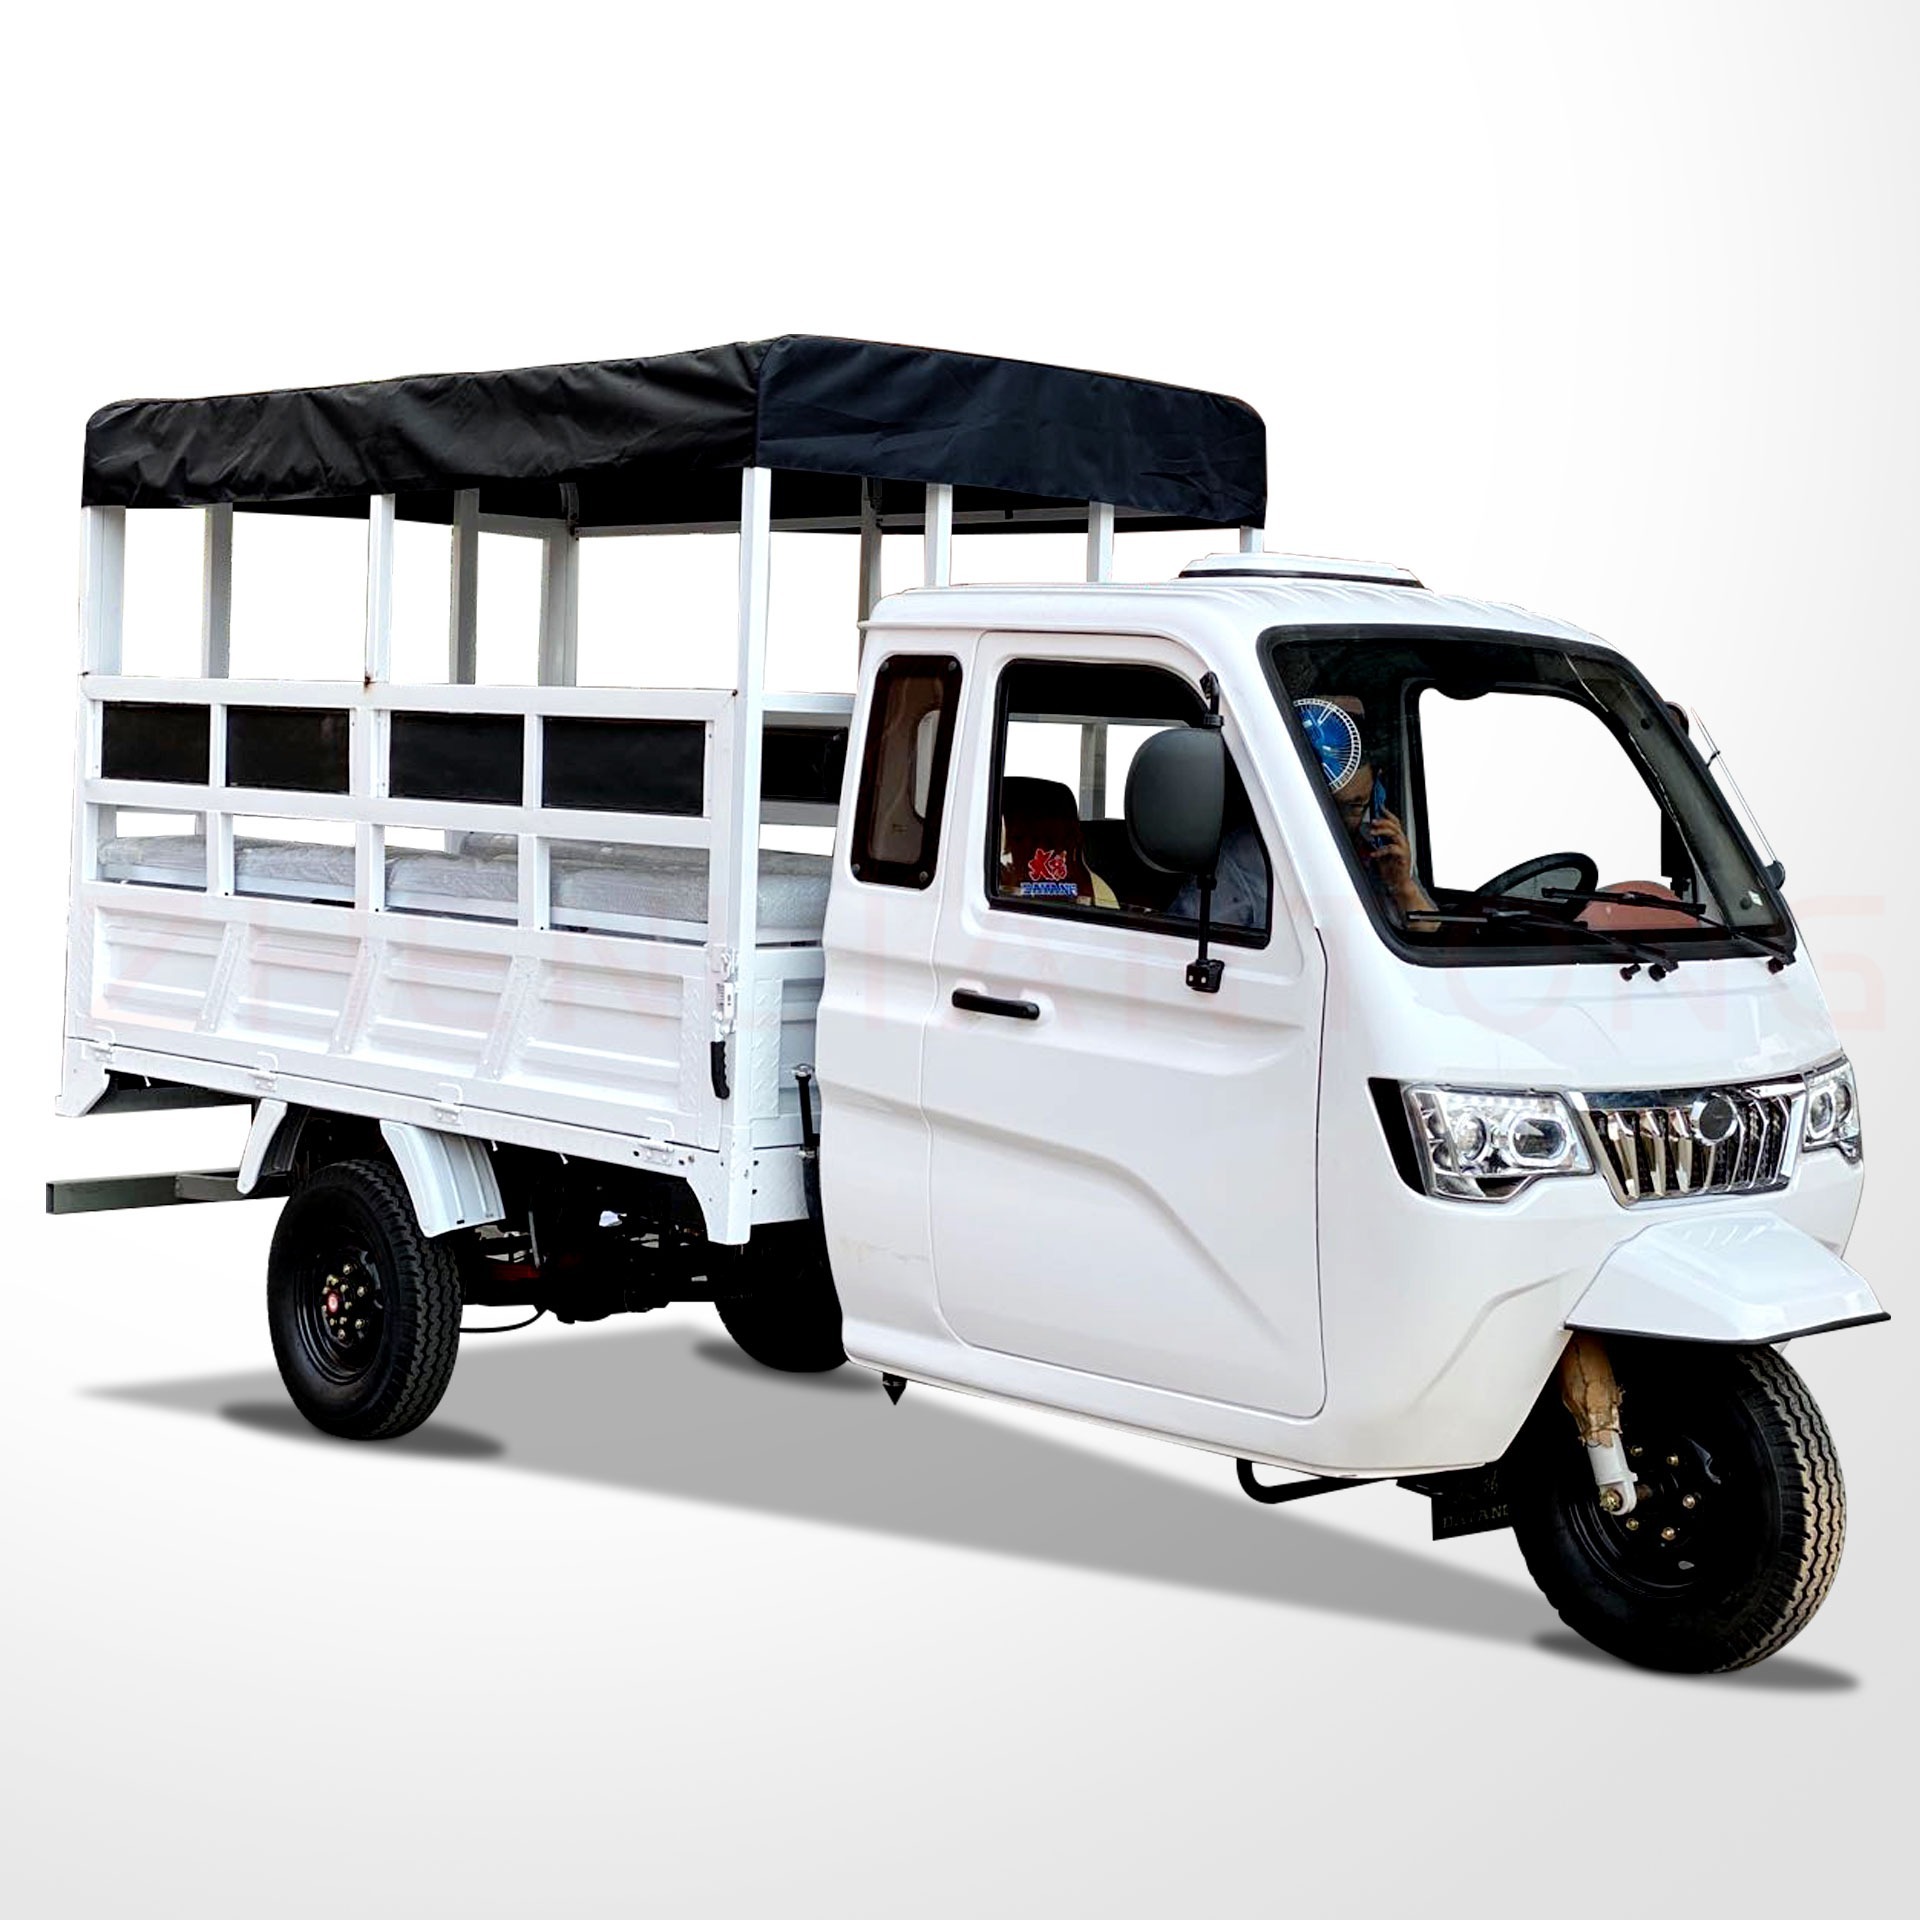 DAYANG DY-P2 Factory price wholesale latest technology 2  seats passenger closed tricycle with big cargo box